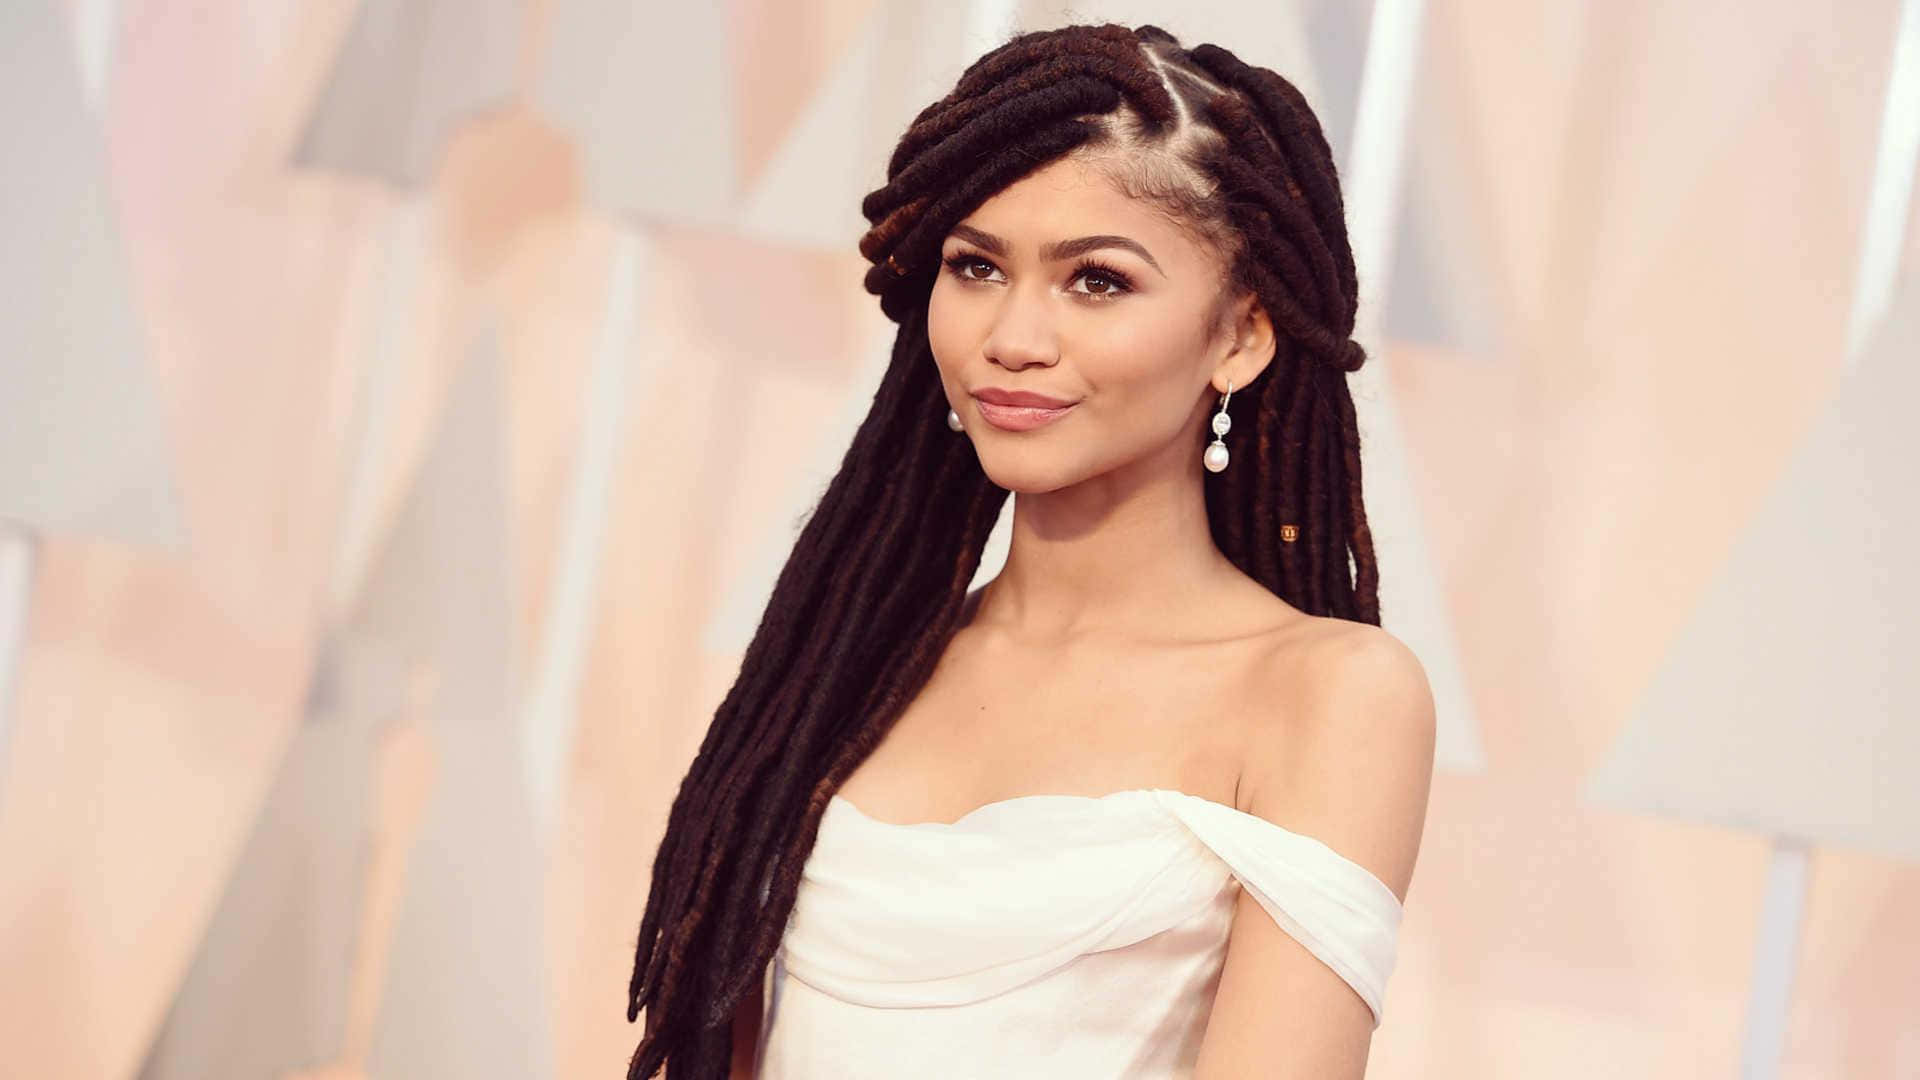 Multi-talented actor and singer Zendaya looks stunning in this photo.